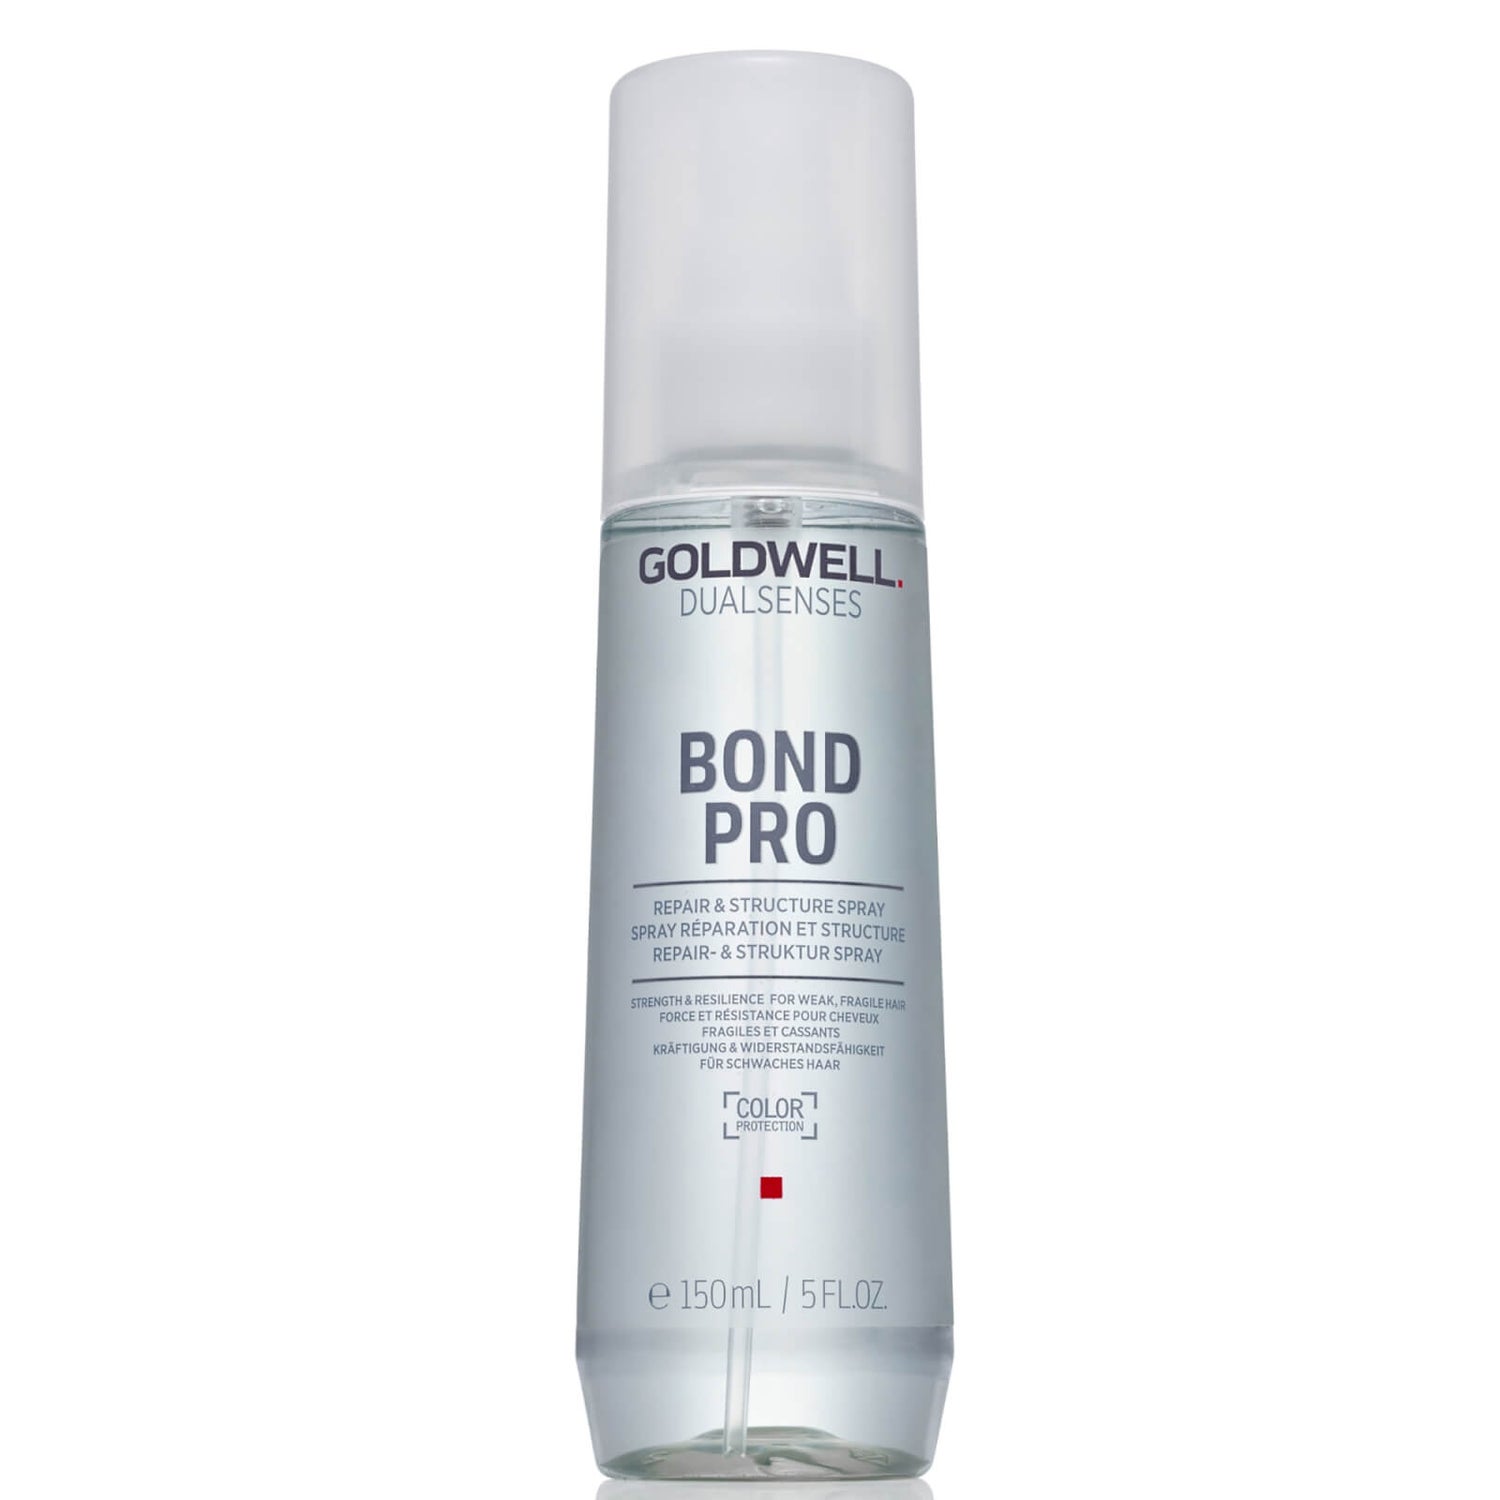 Goldwell Dualsenses Bond Pro Repair and Structure Spray 150ml For Weak, Damaged Hair